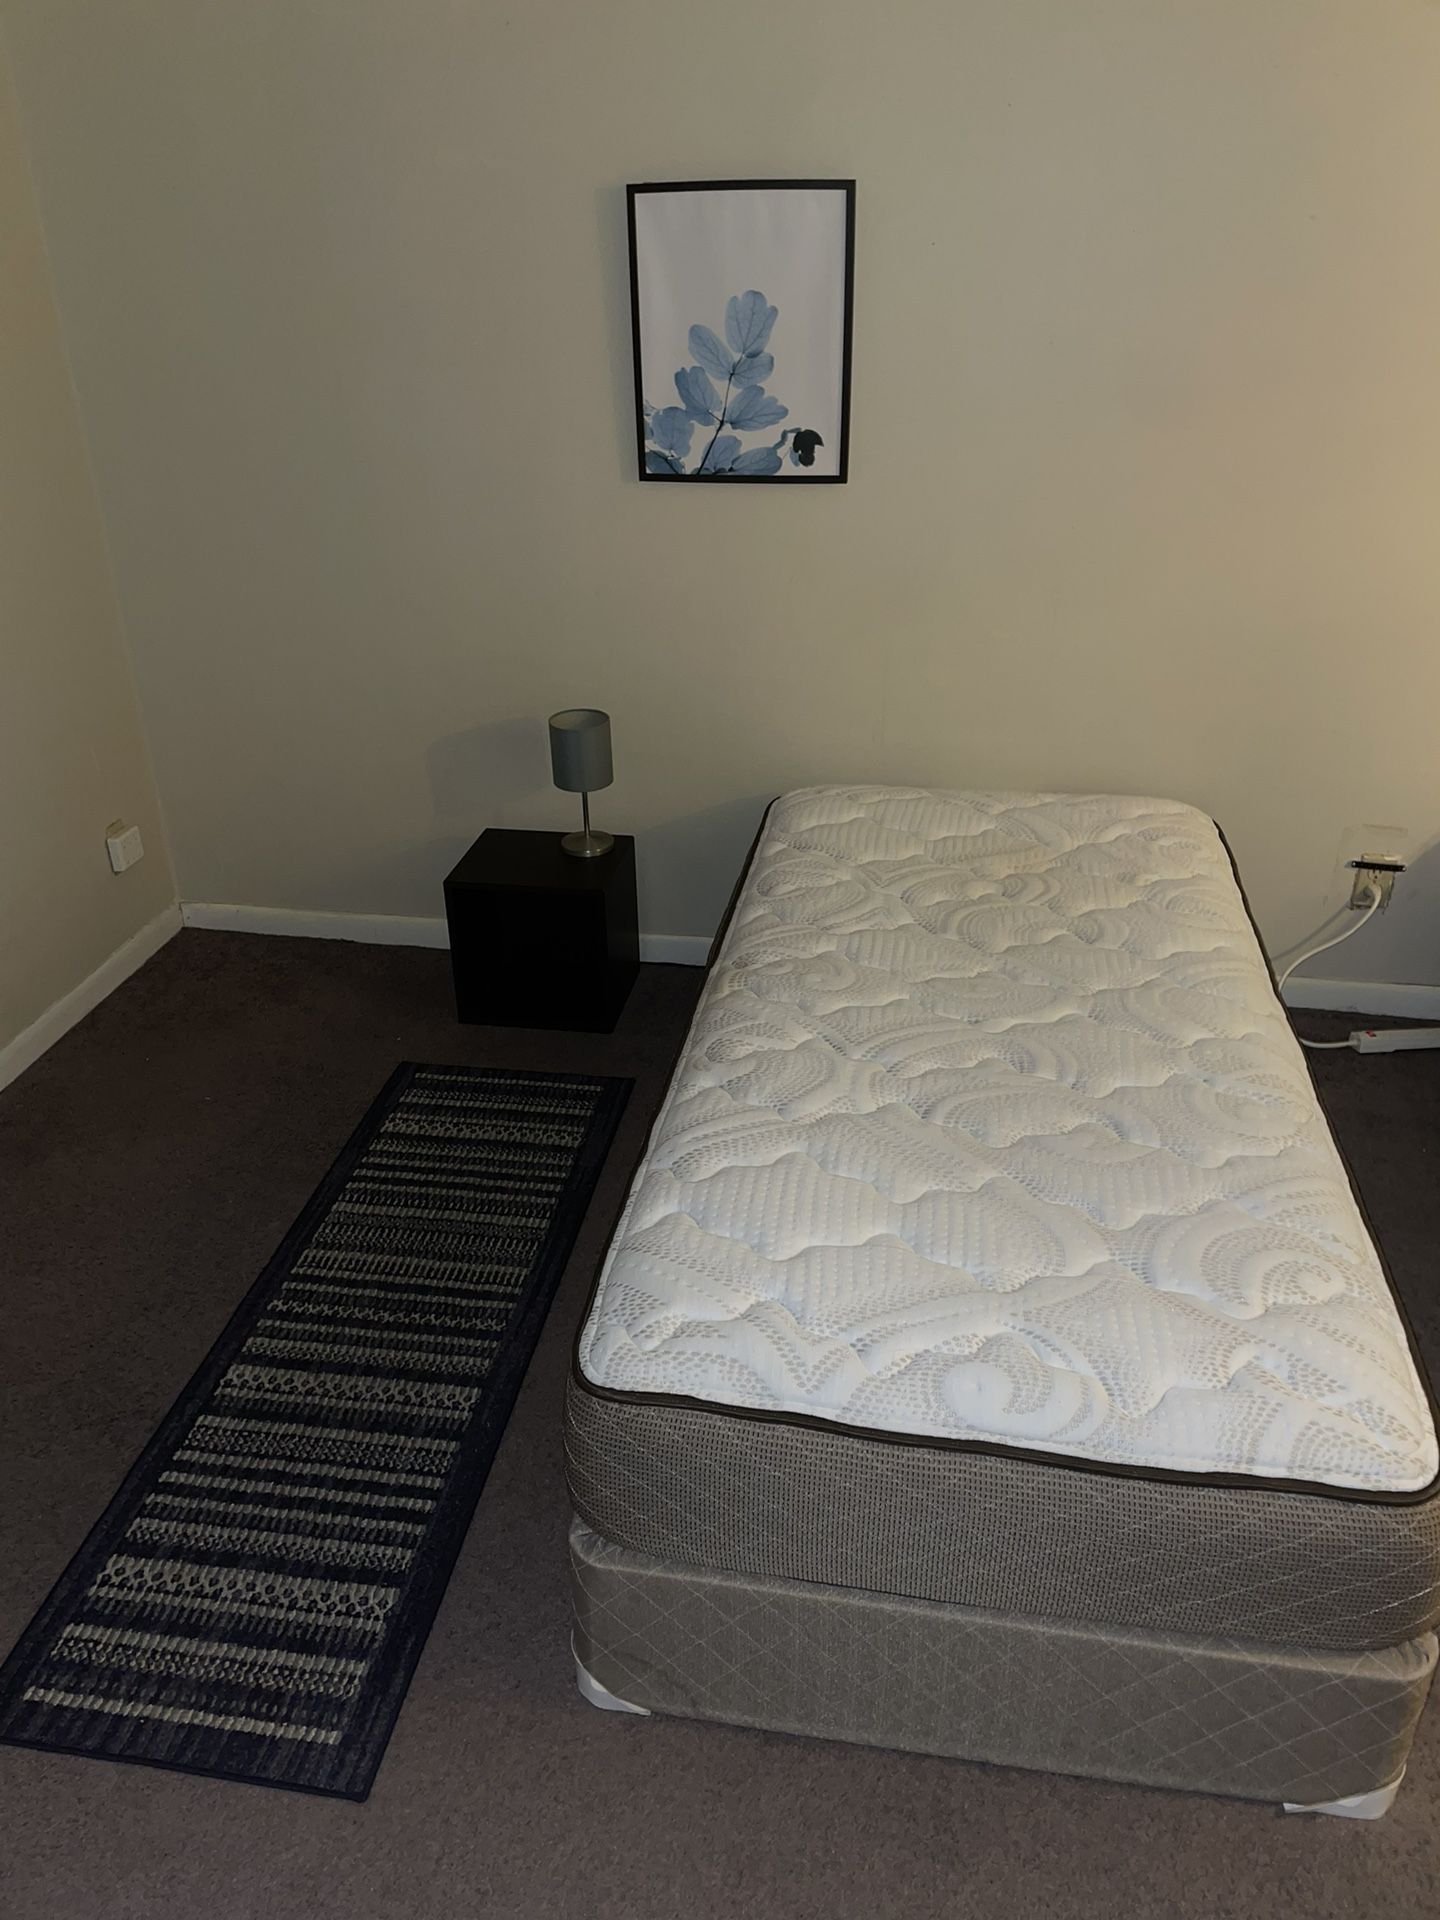 Twin bed + Mattress (Includes Rug, Bedside Table, Lamp And Wall Art)